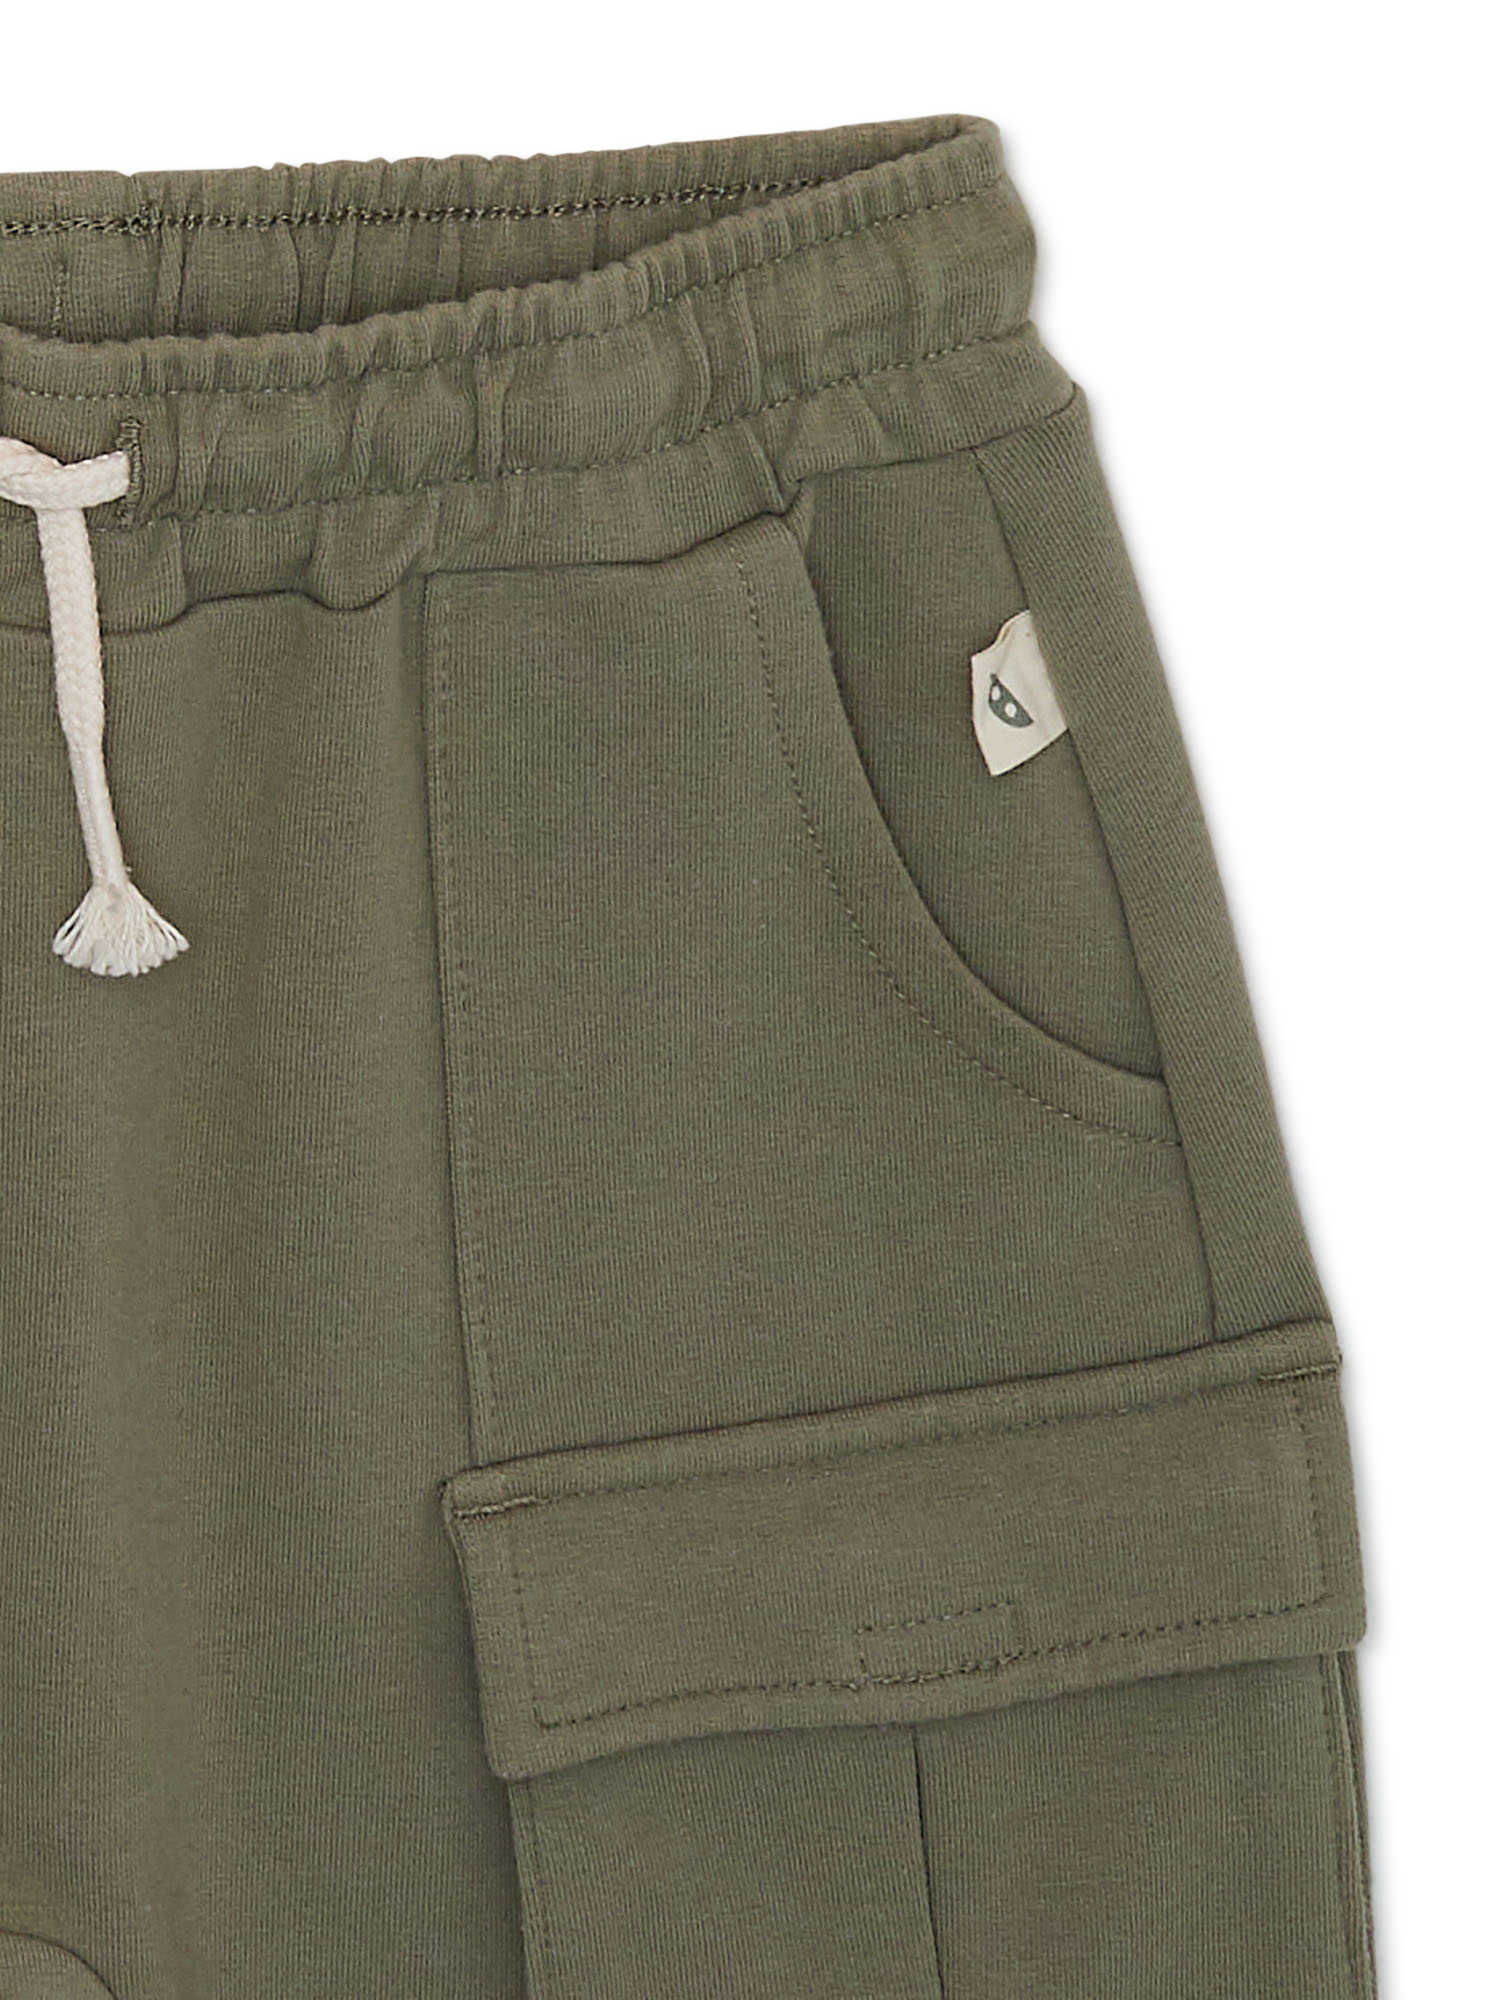 easy-peasy Toddler Boy French Terry Cargo Shorts, Sizes 12 Months-5T - image 2 of 5